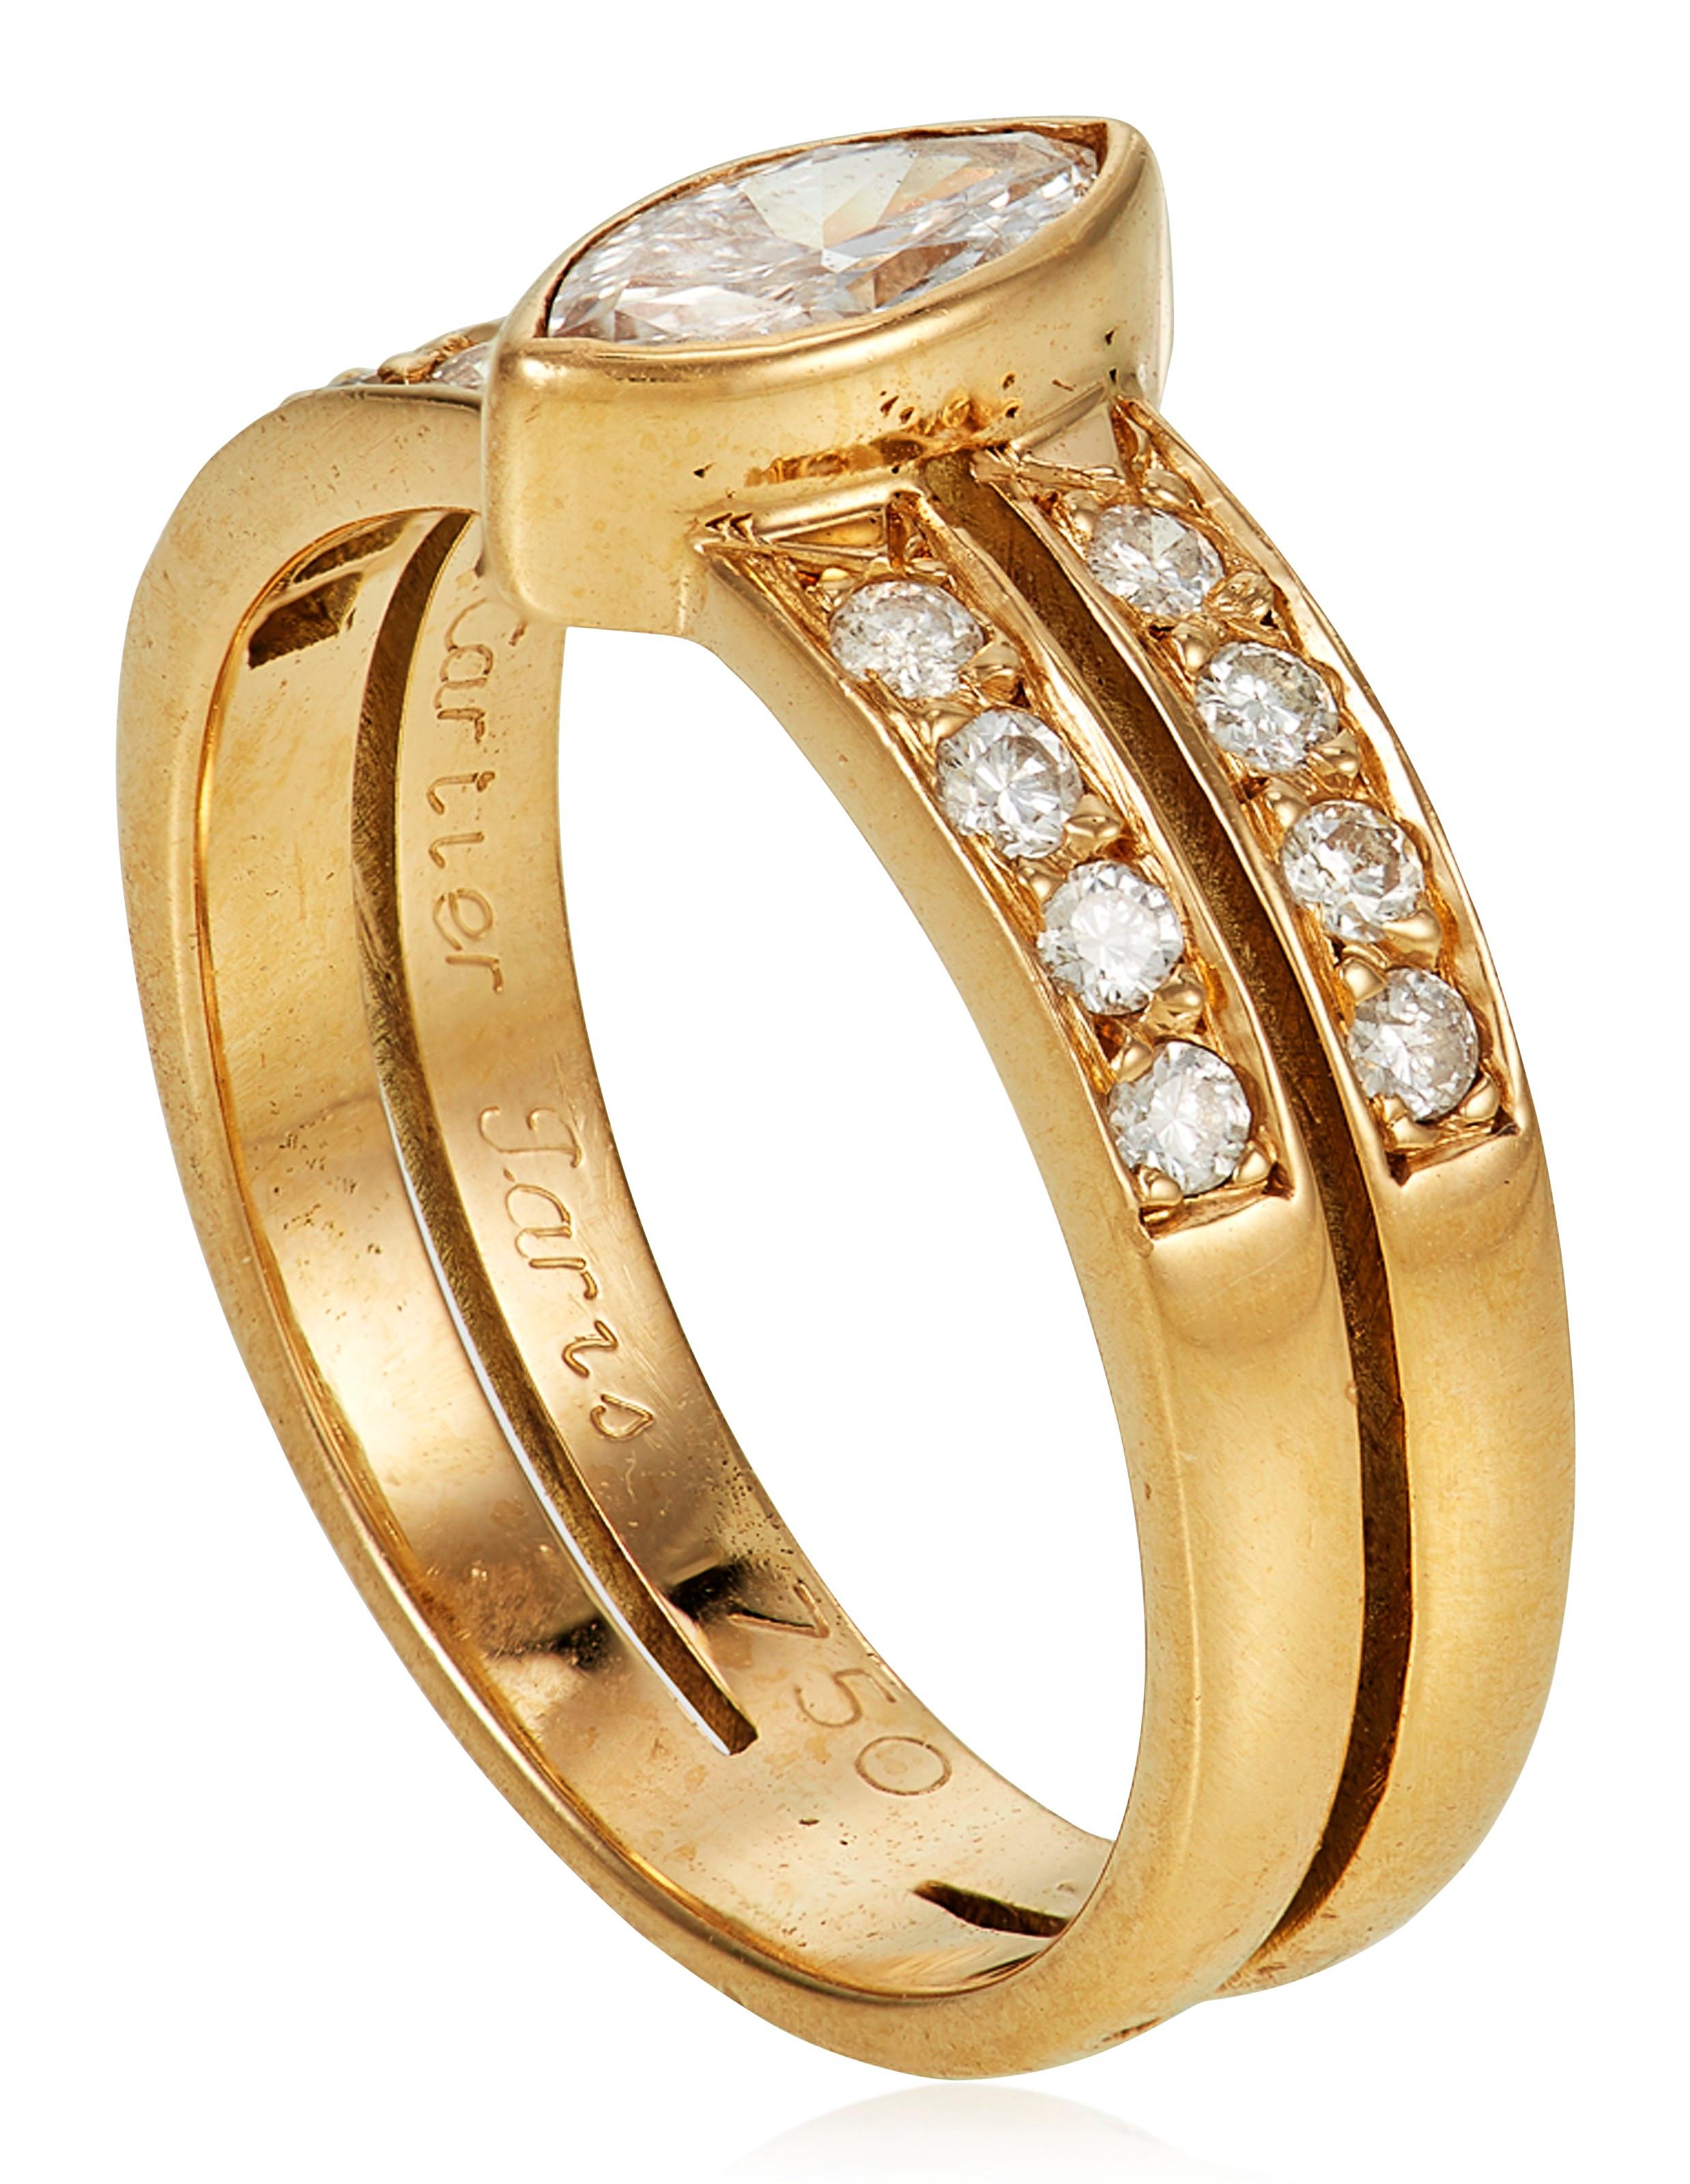 A unique 18k yellow gold diamond Cartier ring. The ring comprises of a marquise cut diamond in a rubover setting with a total weight of approximately 0.40 ct., G color and VvS clarity. Complementing the centre stone are two rows of 4 round brilliant